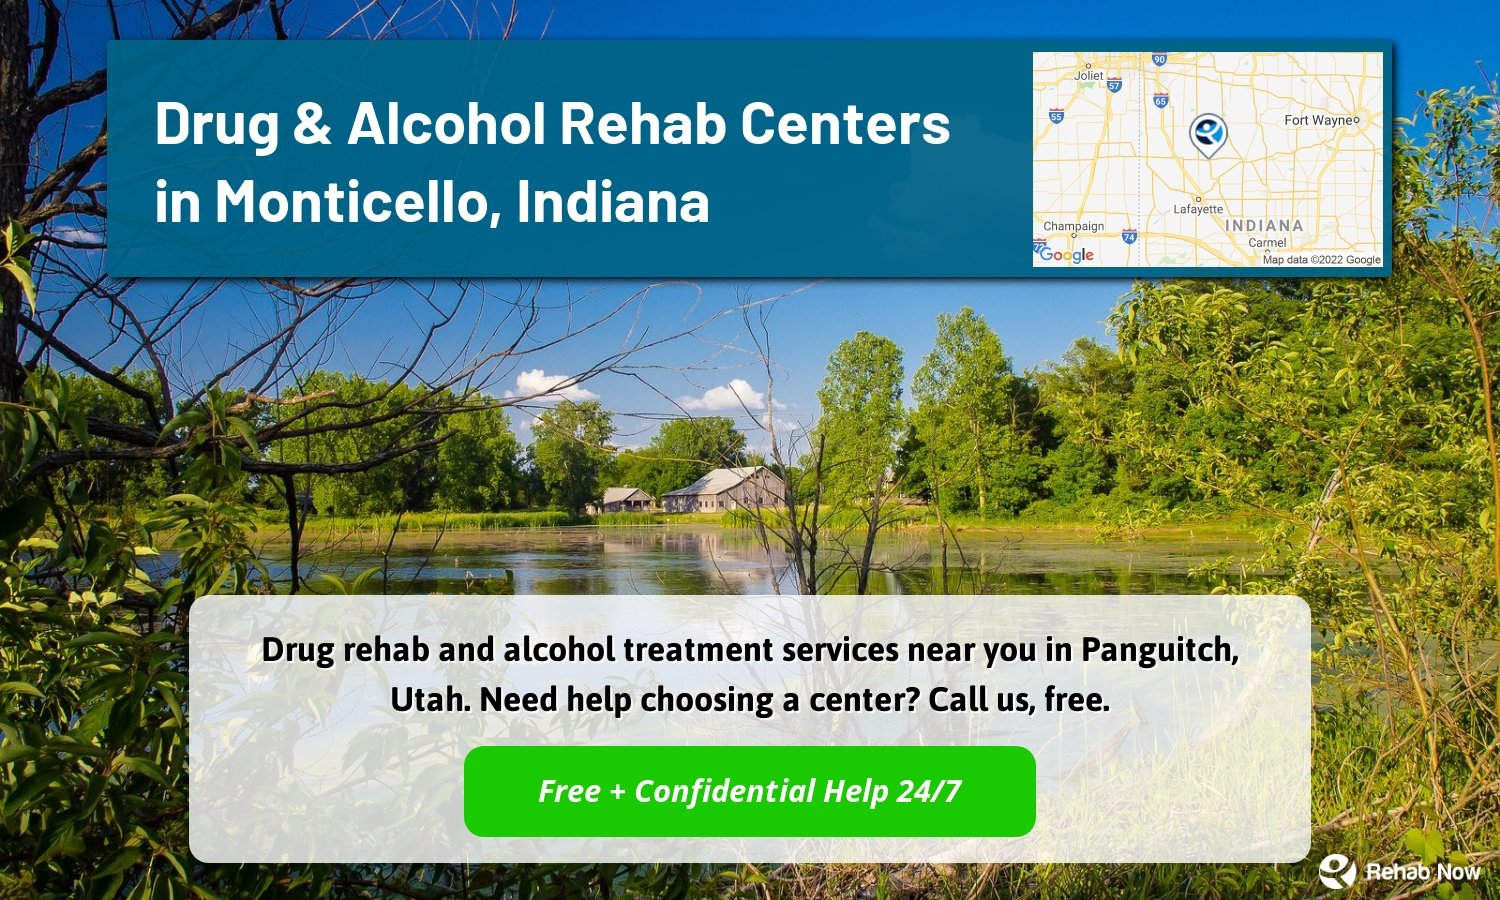 Drug rehab and alcohol treatment services near you in Panguitch, Utah. Need help choosing a center? Call us, free.